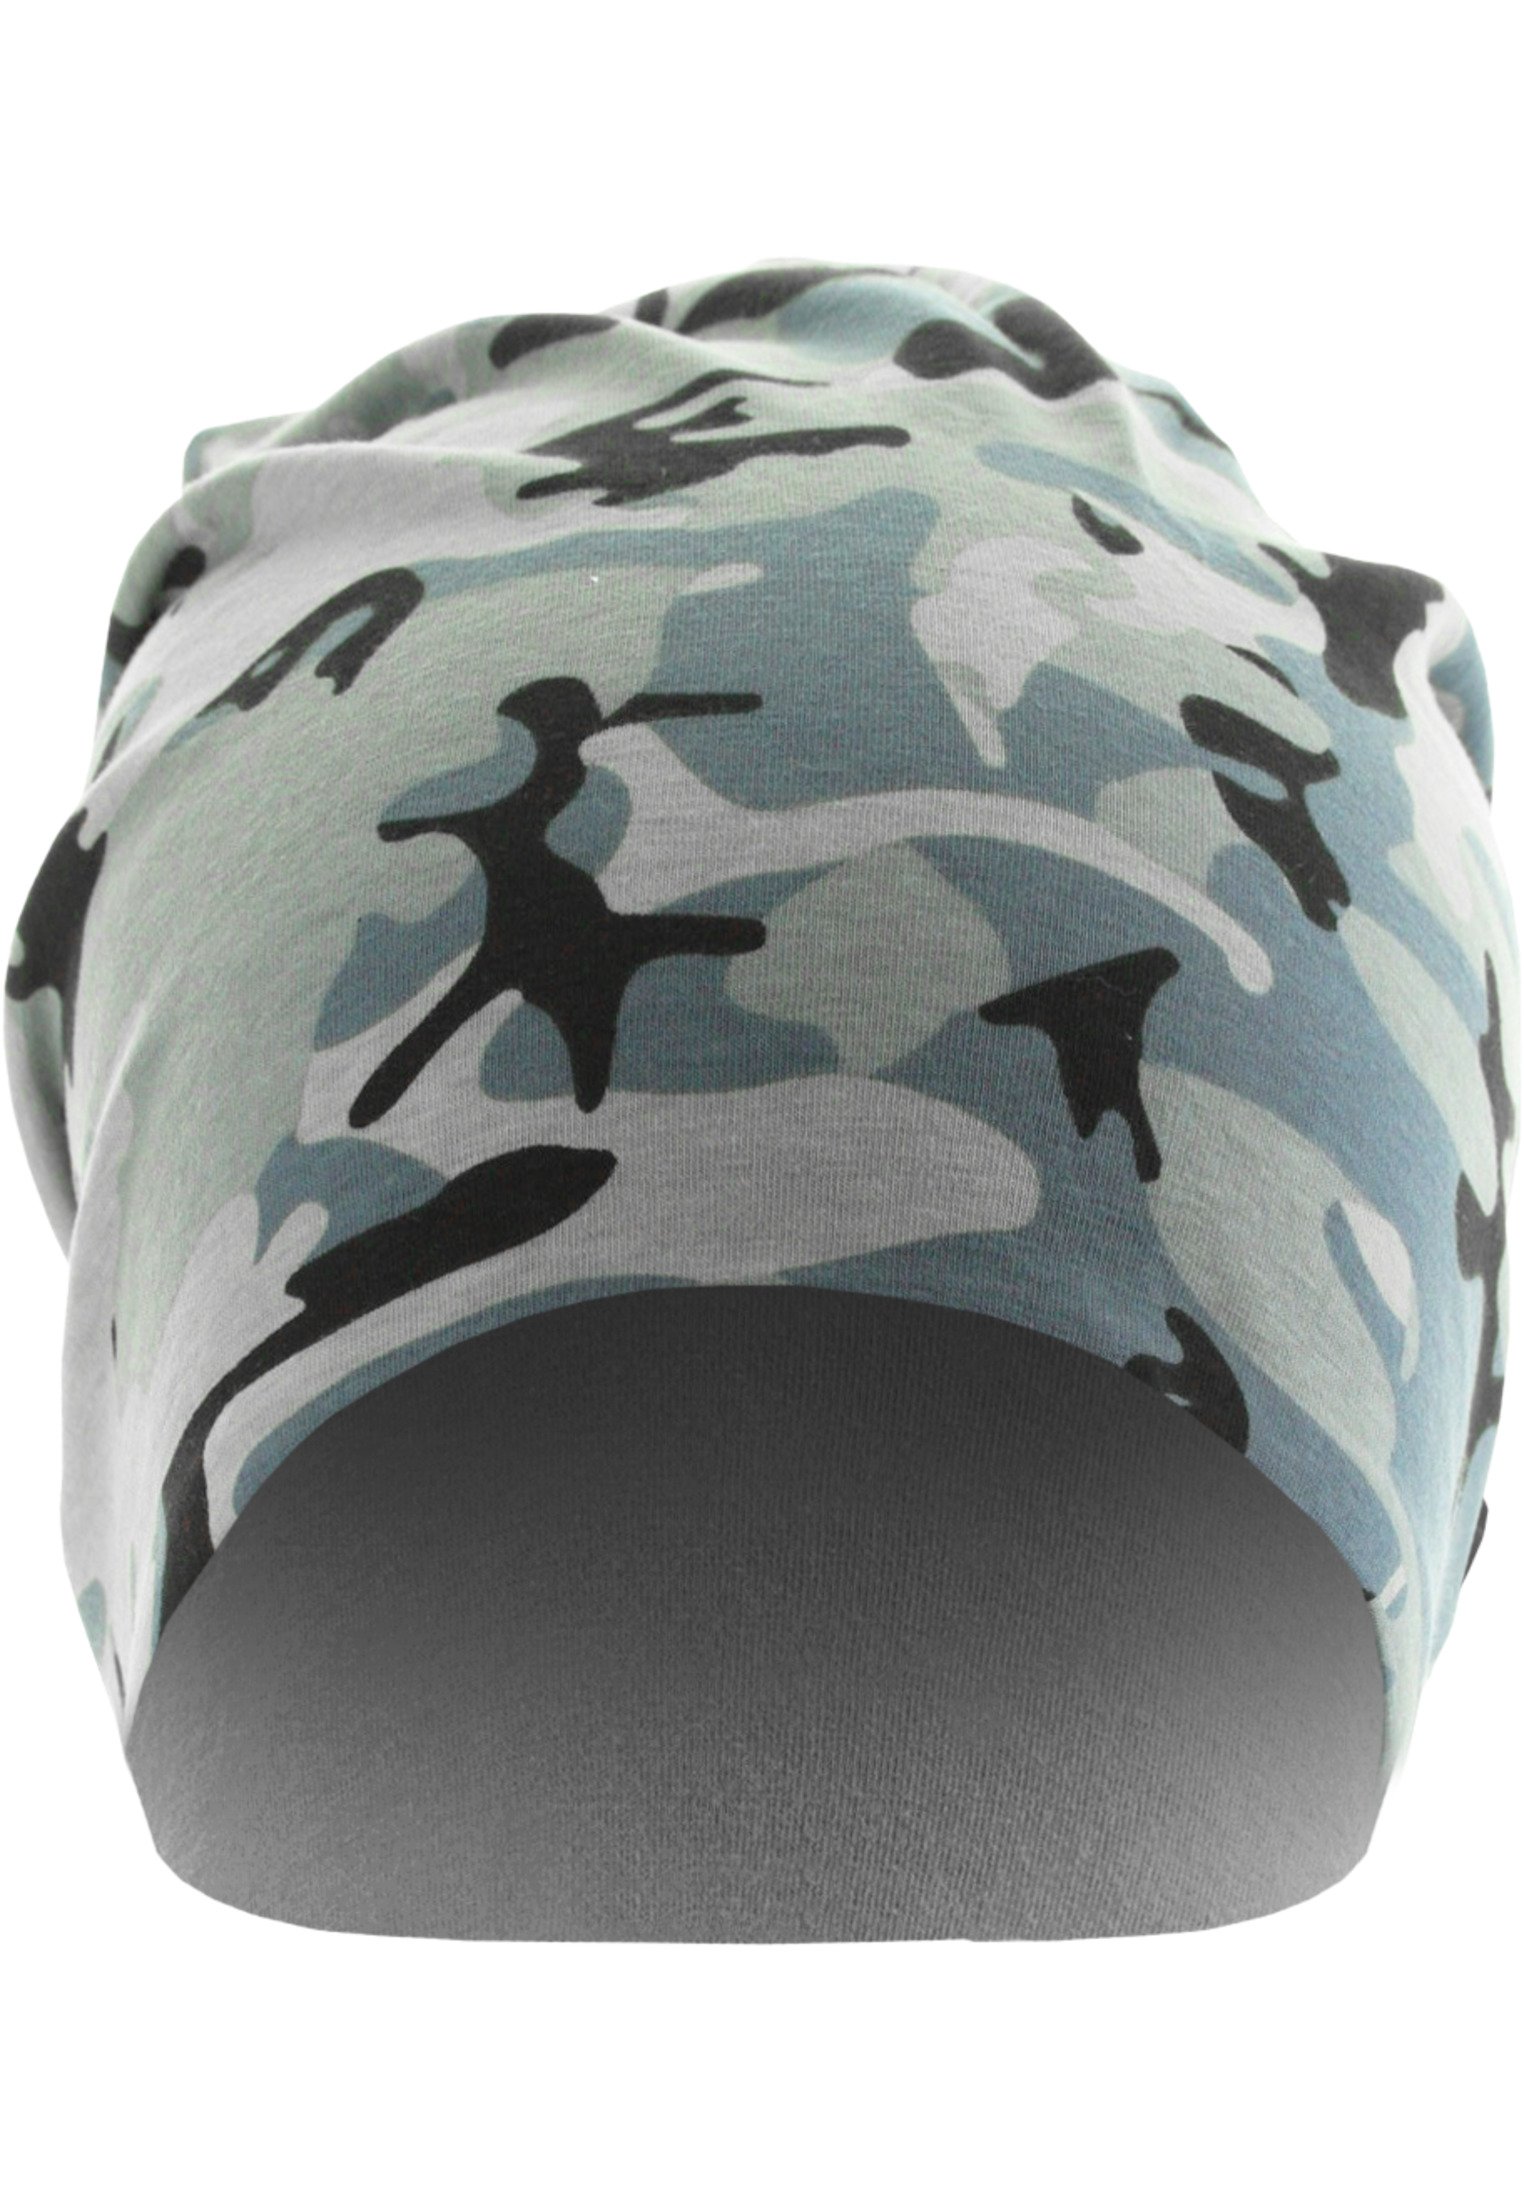 Printed Jersey Beanie grey camo/charcoal one size